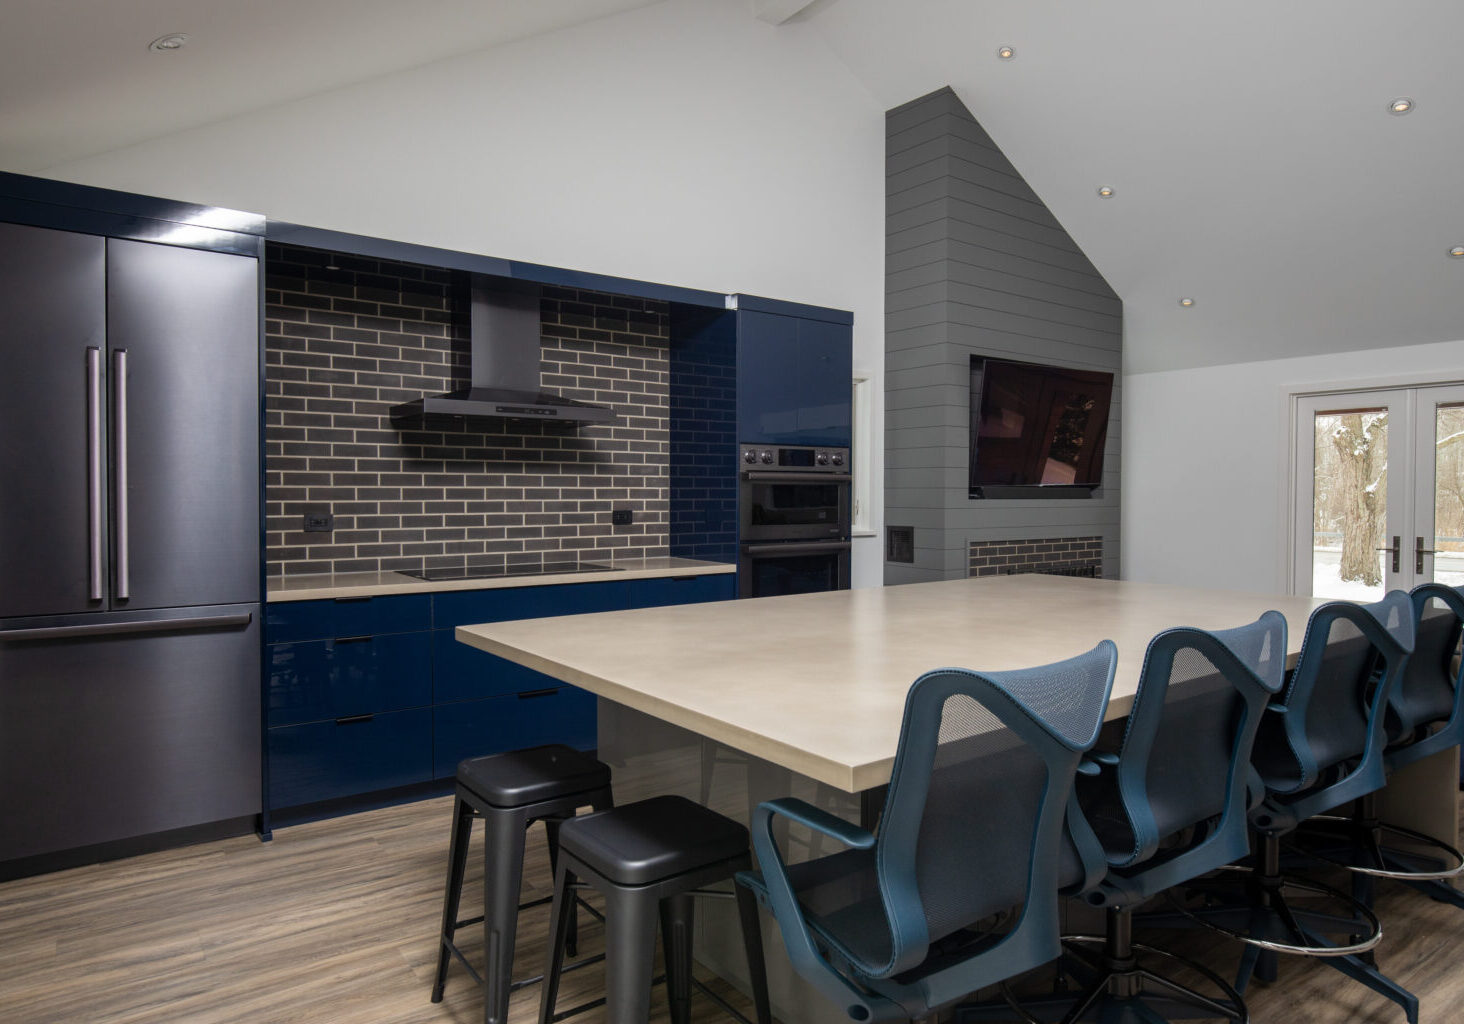 Modern kitchen and living area with navy blue cabinets, light grey wood paneling, white walls, and a spacious island